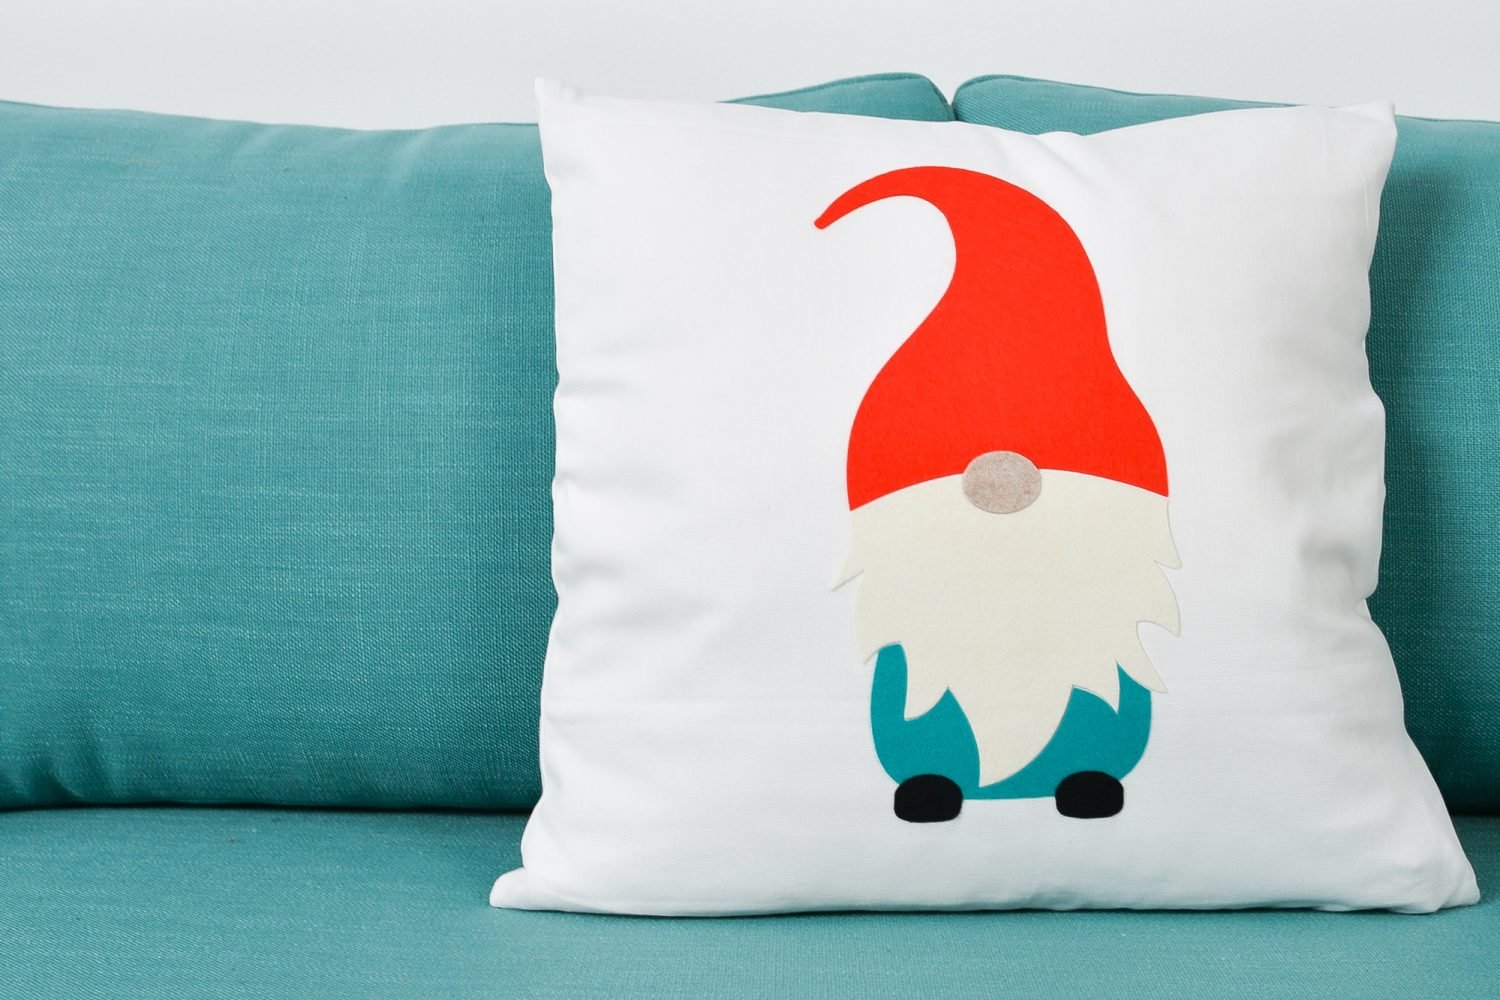 Finished gnome pillow sitting on a blue couch.